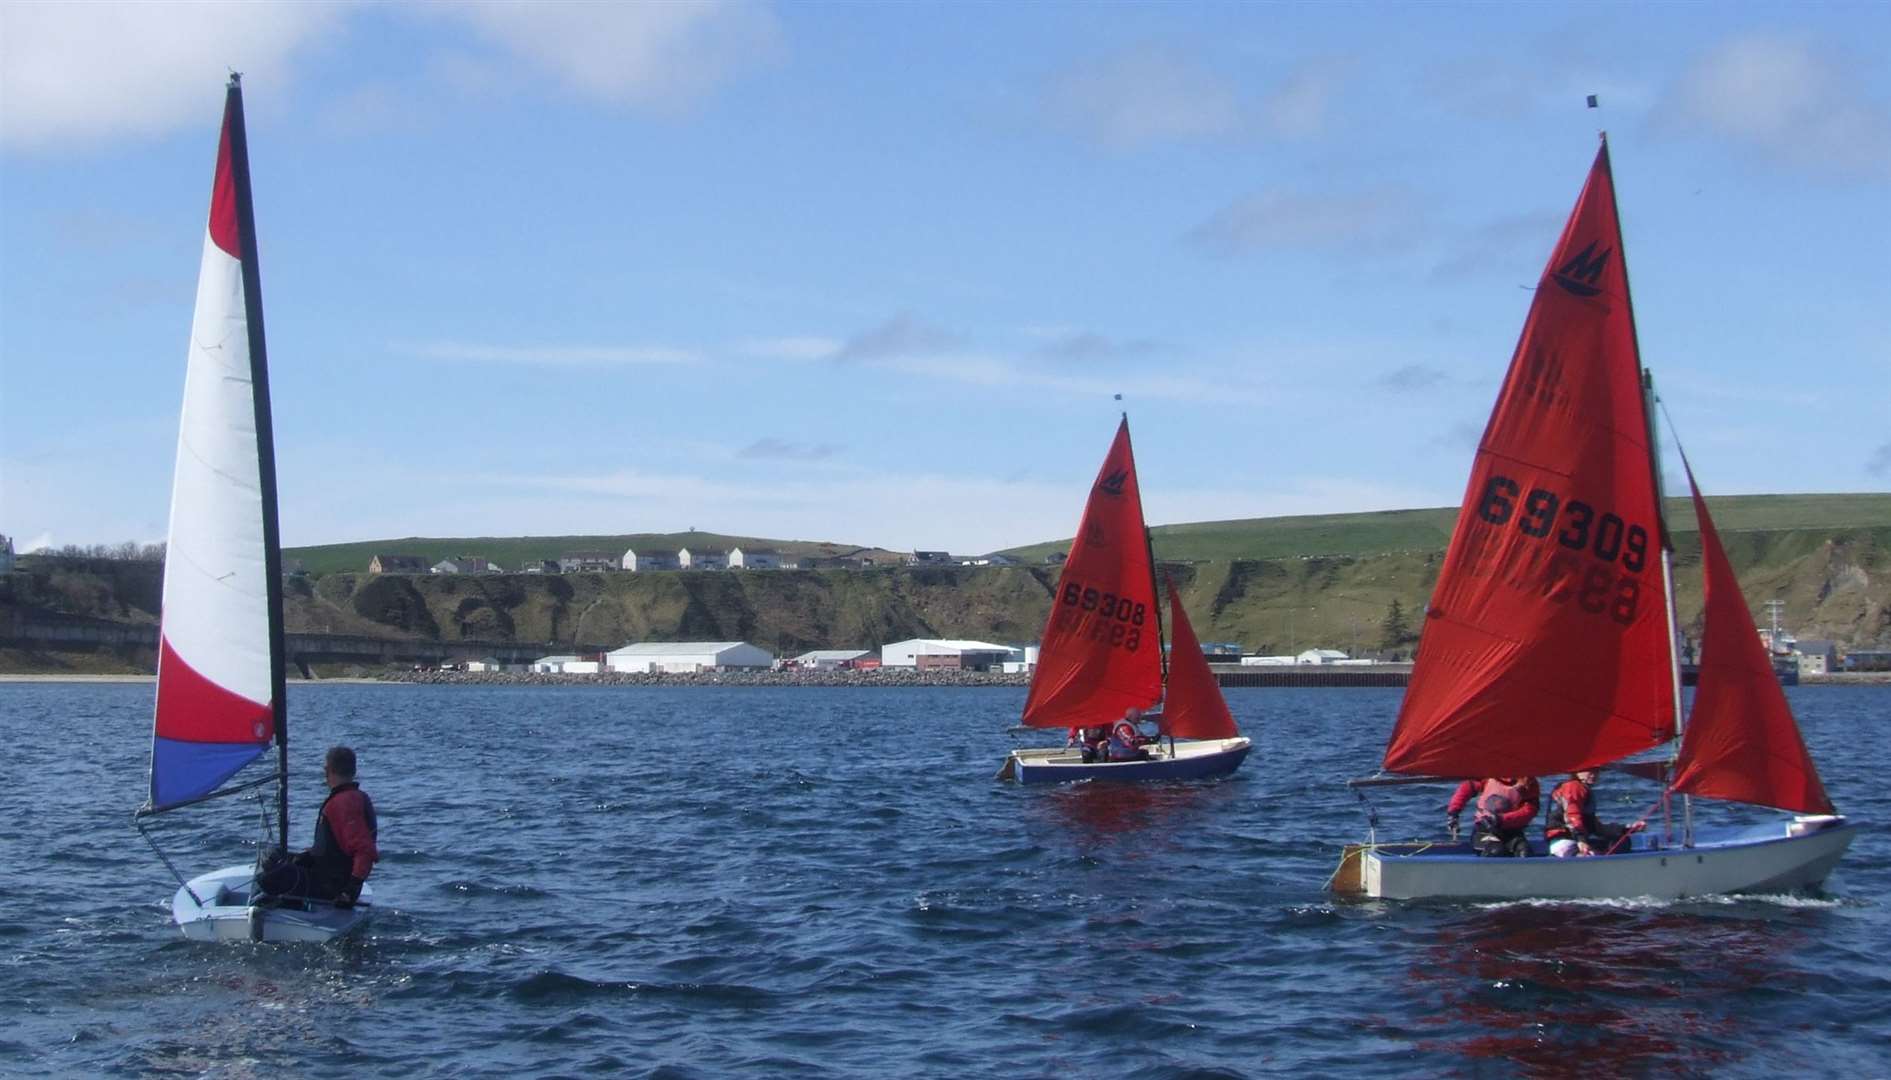 The Topper and two Mirror dinghies taking part in Sunday's event.